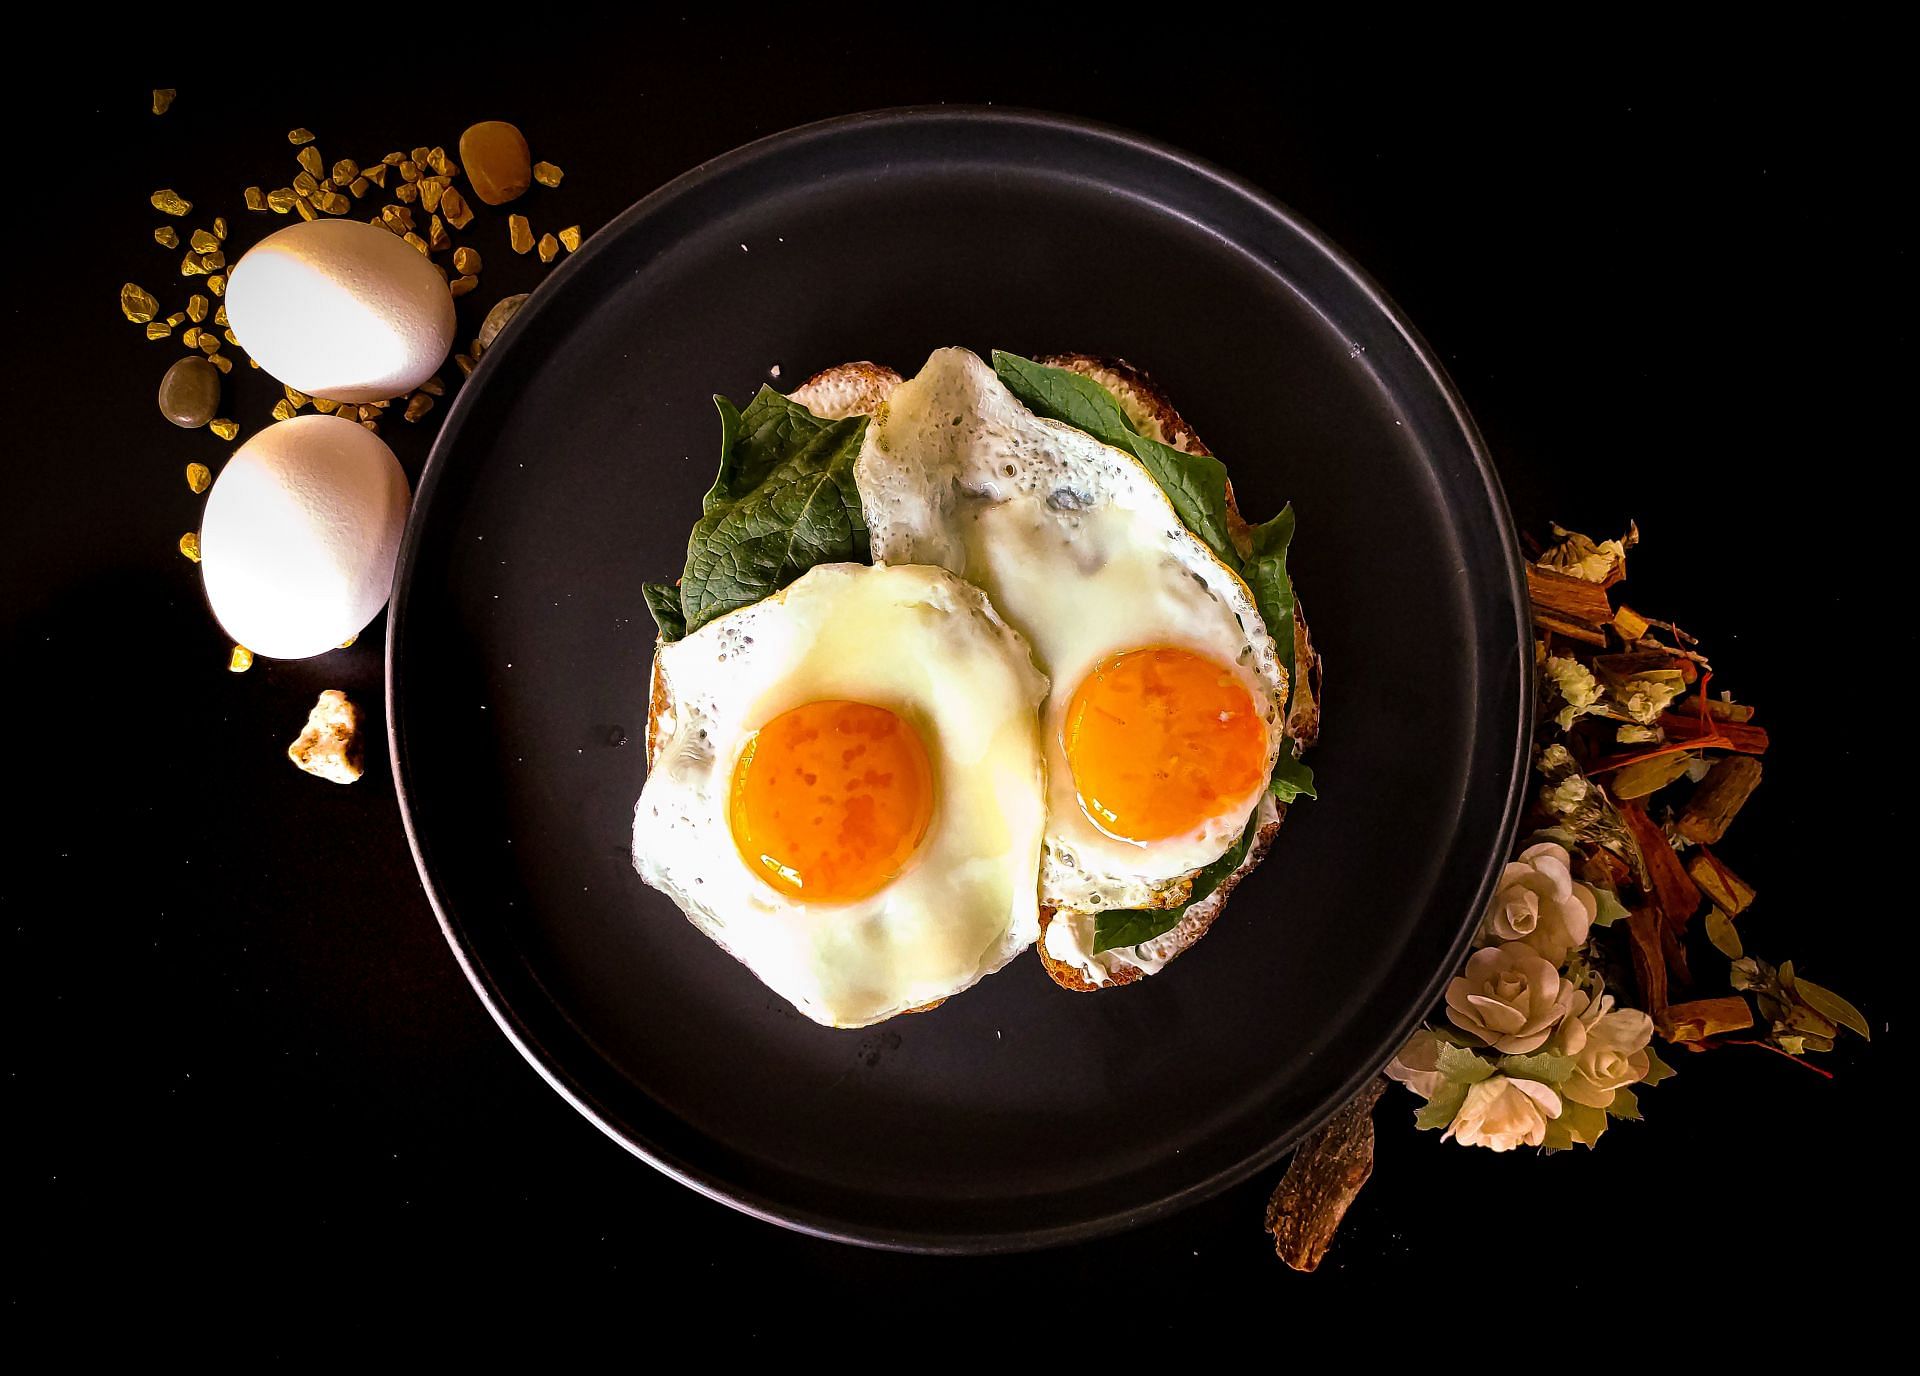 The low-carb profile makes eggs good for weight loss. (Image via Unsplash/Coffeefy Workafe)